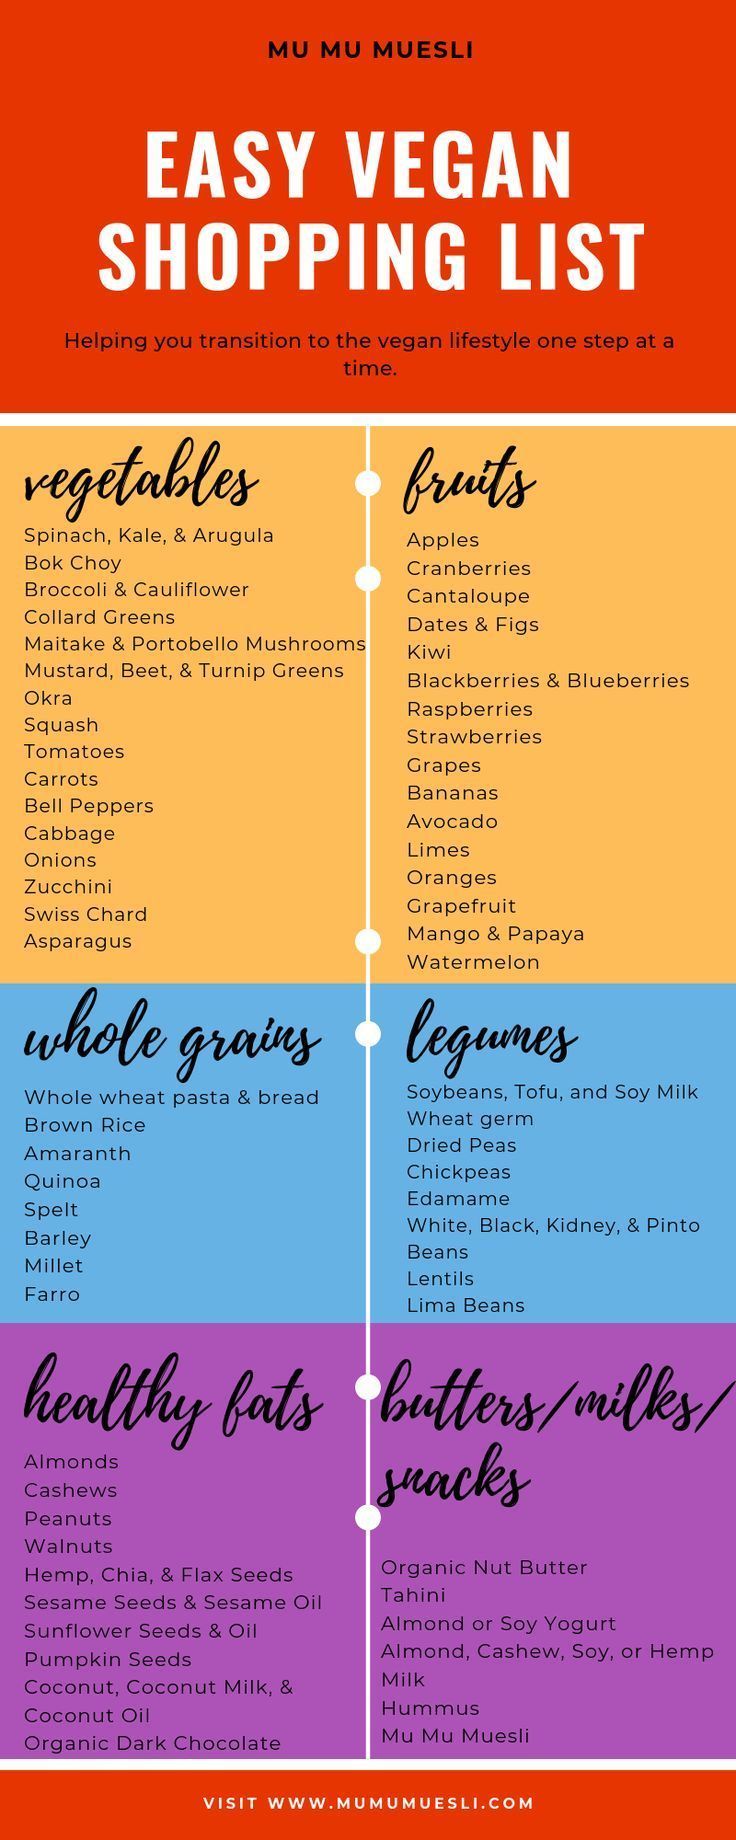 11 healthy recipes Diet grocery lists ideas